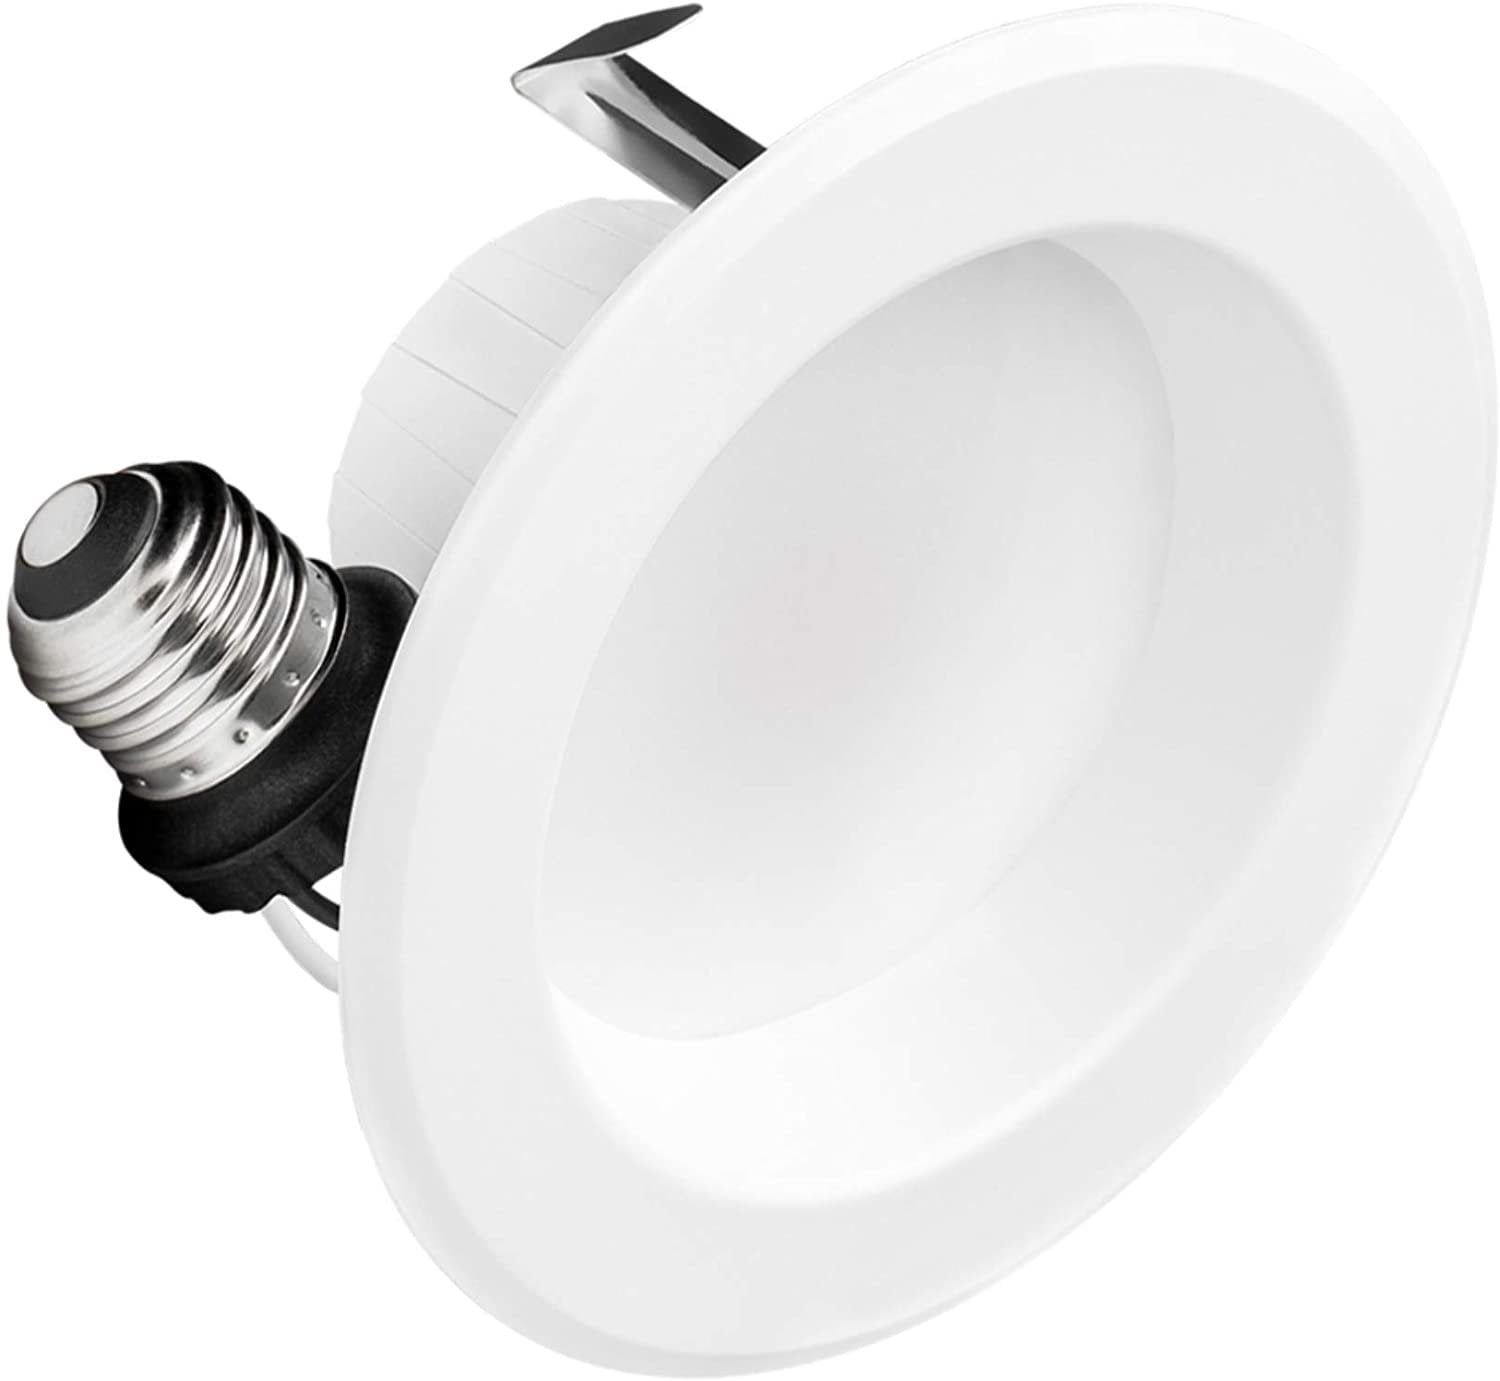 Dimmable Downlight 9W=65W 12 Pack Energy Star Hyperikon 4 Inch LED Recessed Lighting UL Daylight White